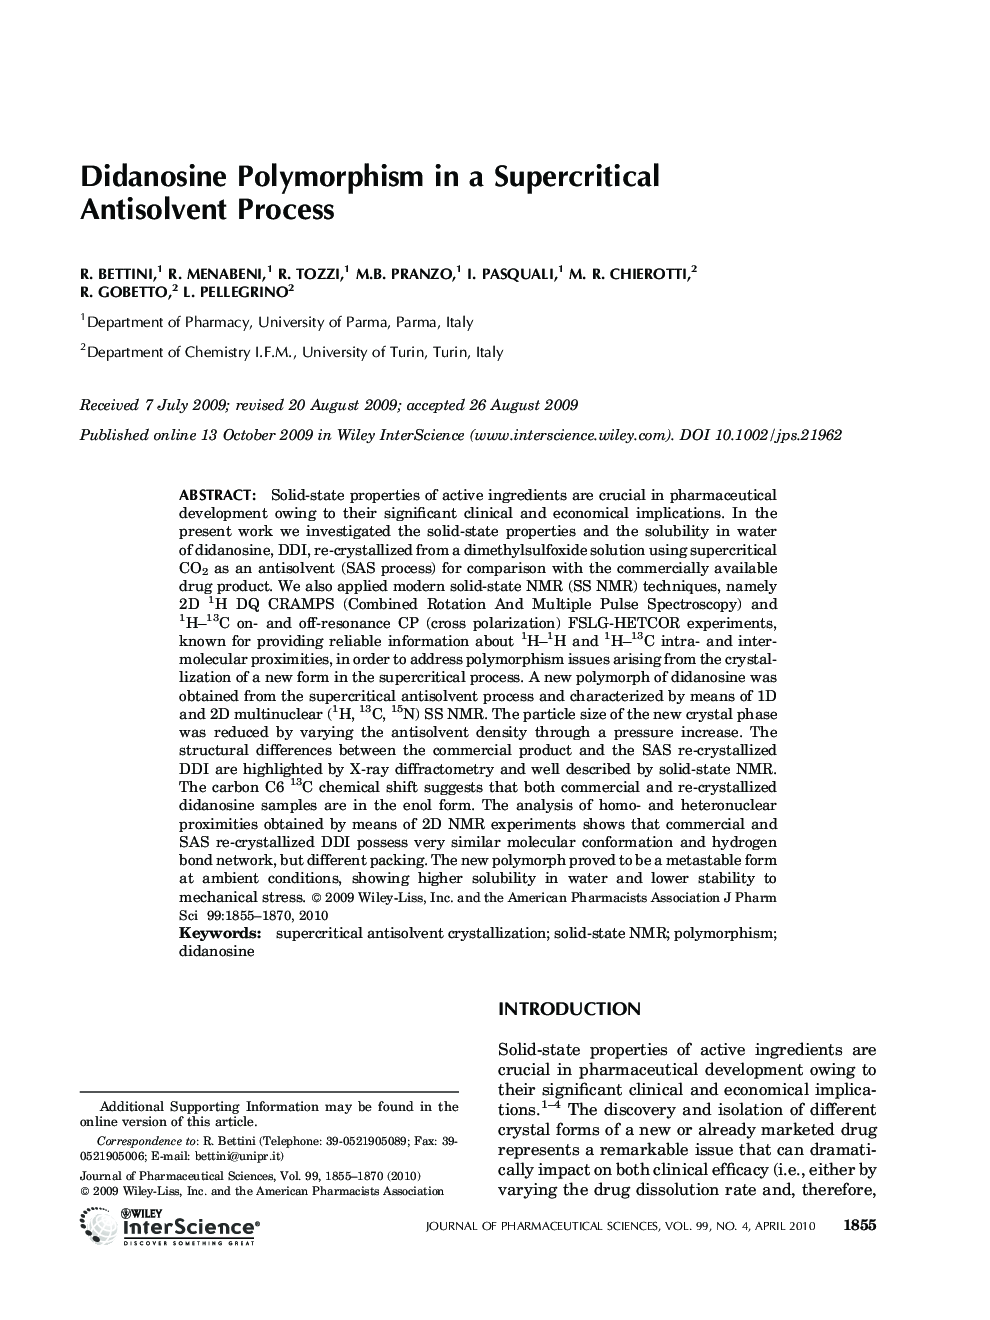 Didanosine Polymorphism in a Supercritical Antisolvent Process